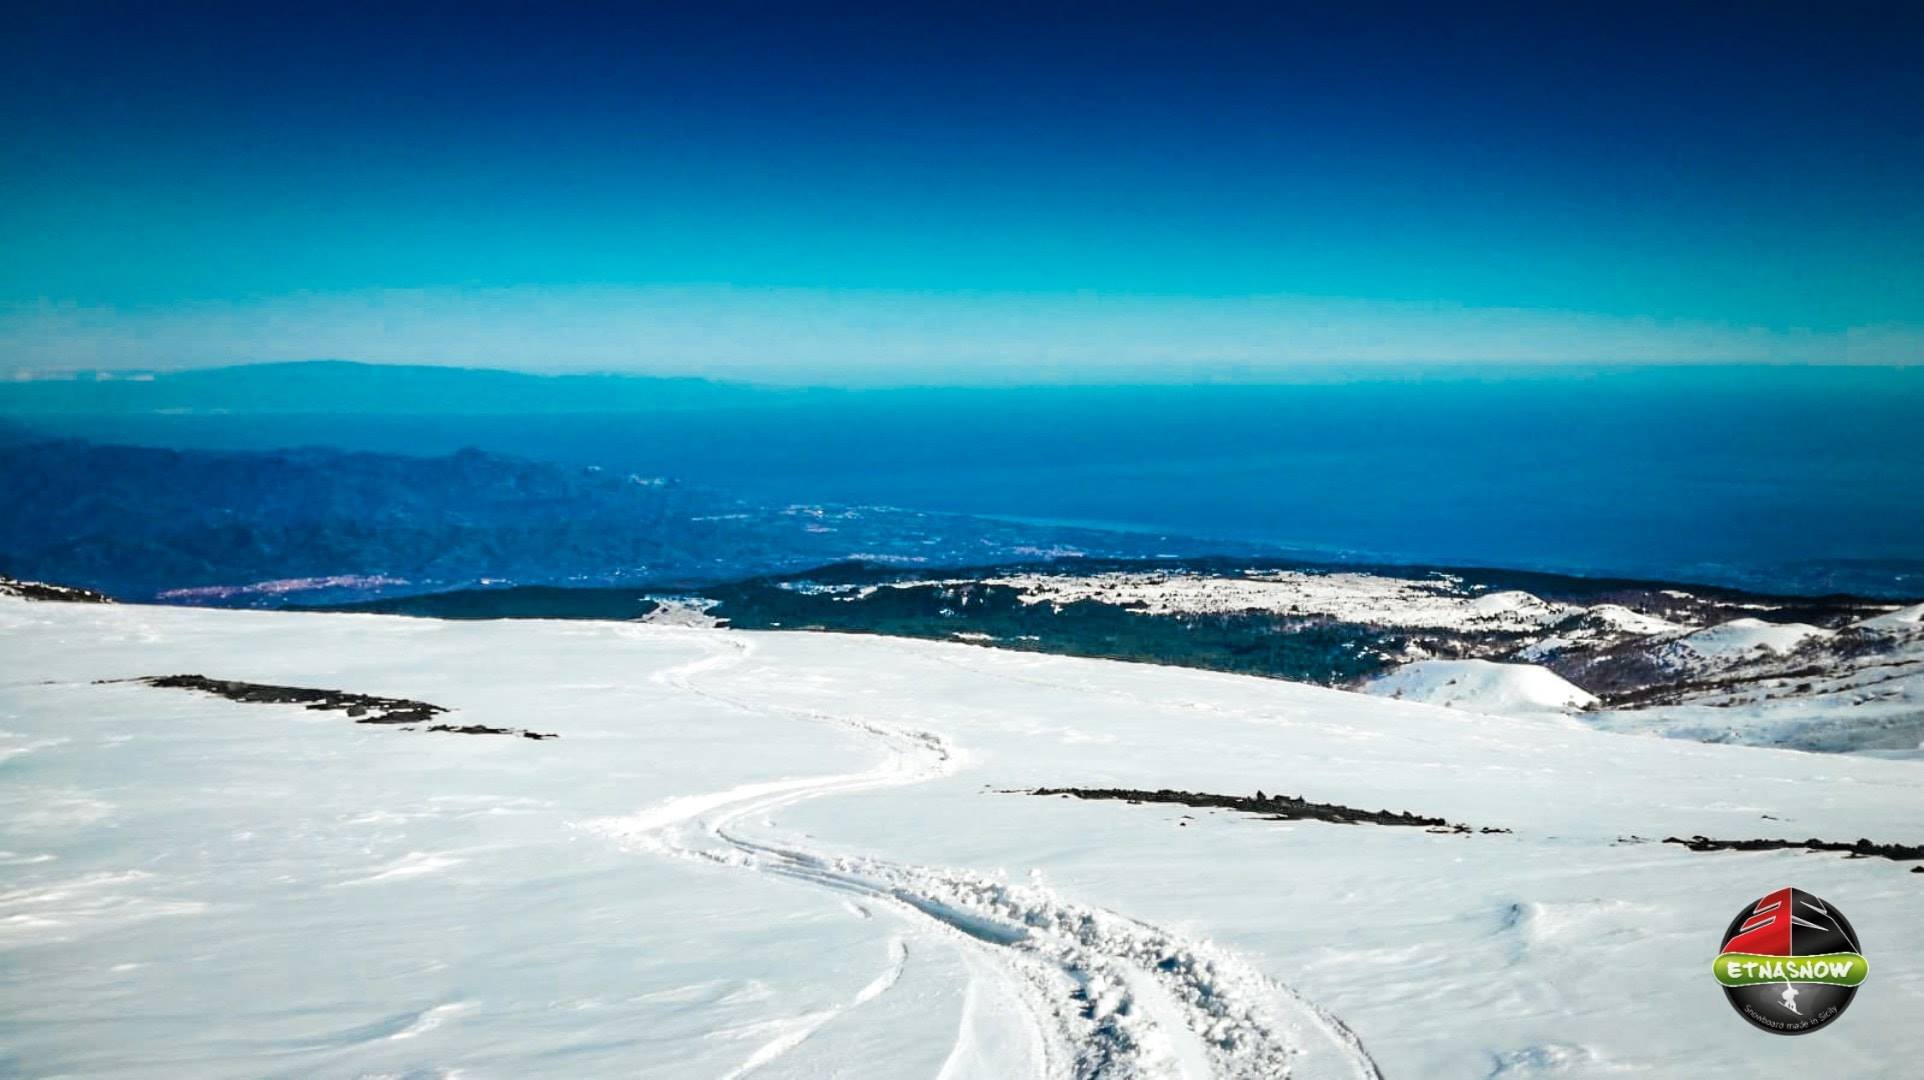 The view of the snow-covered Etna on the north side - Winter 2019